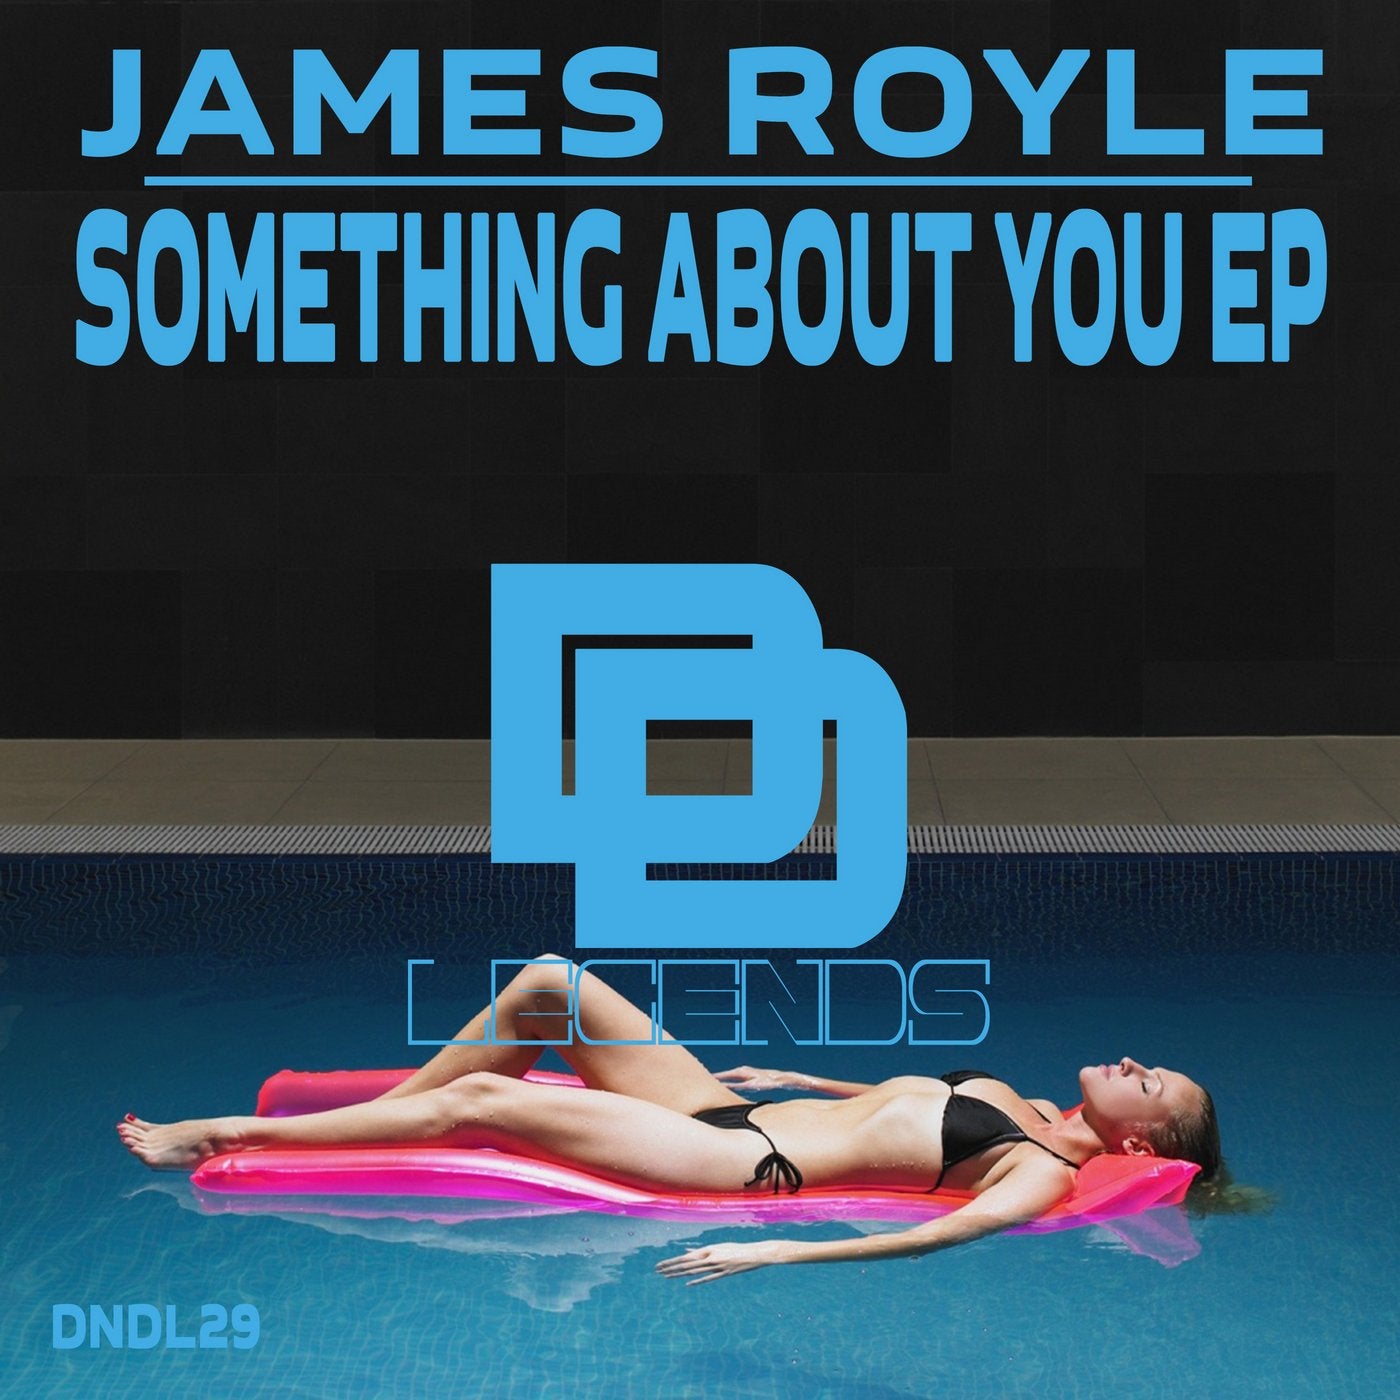 Something About You EP